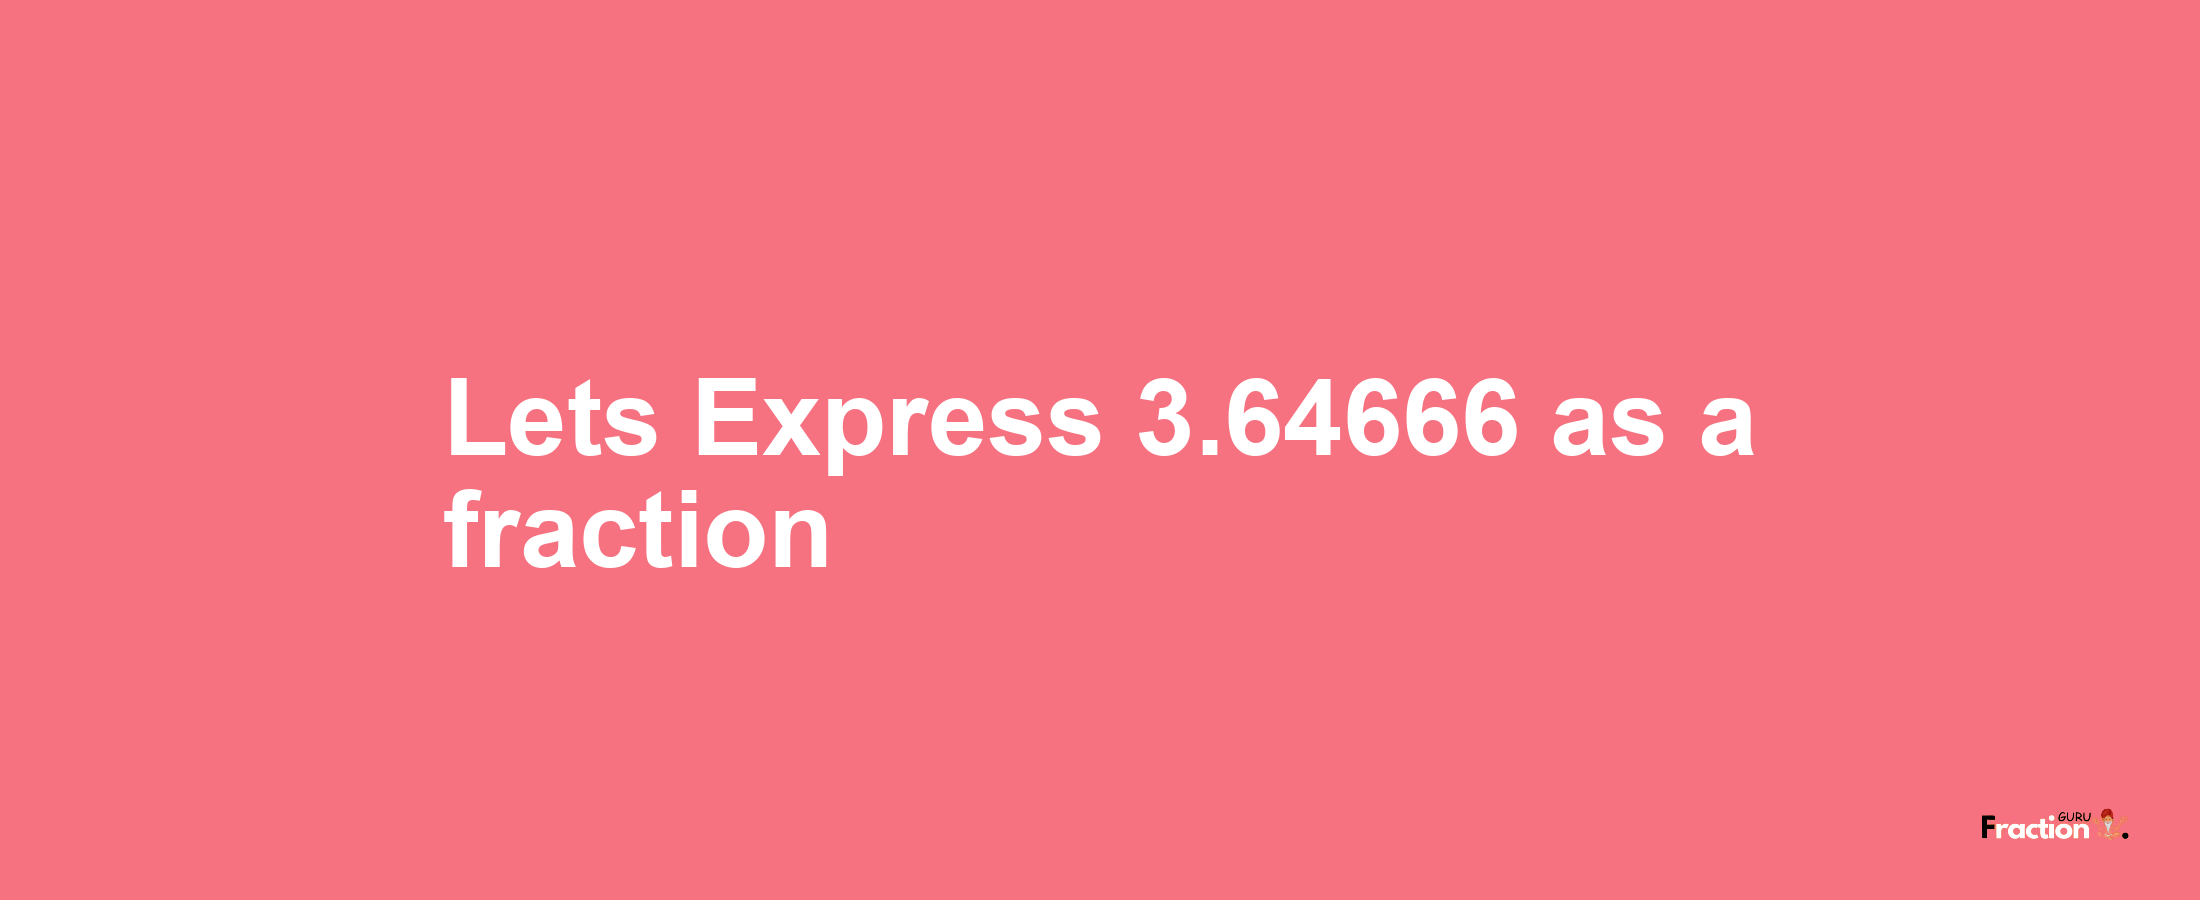 Lets Express 3.64666 as afraction